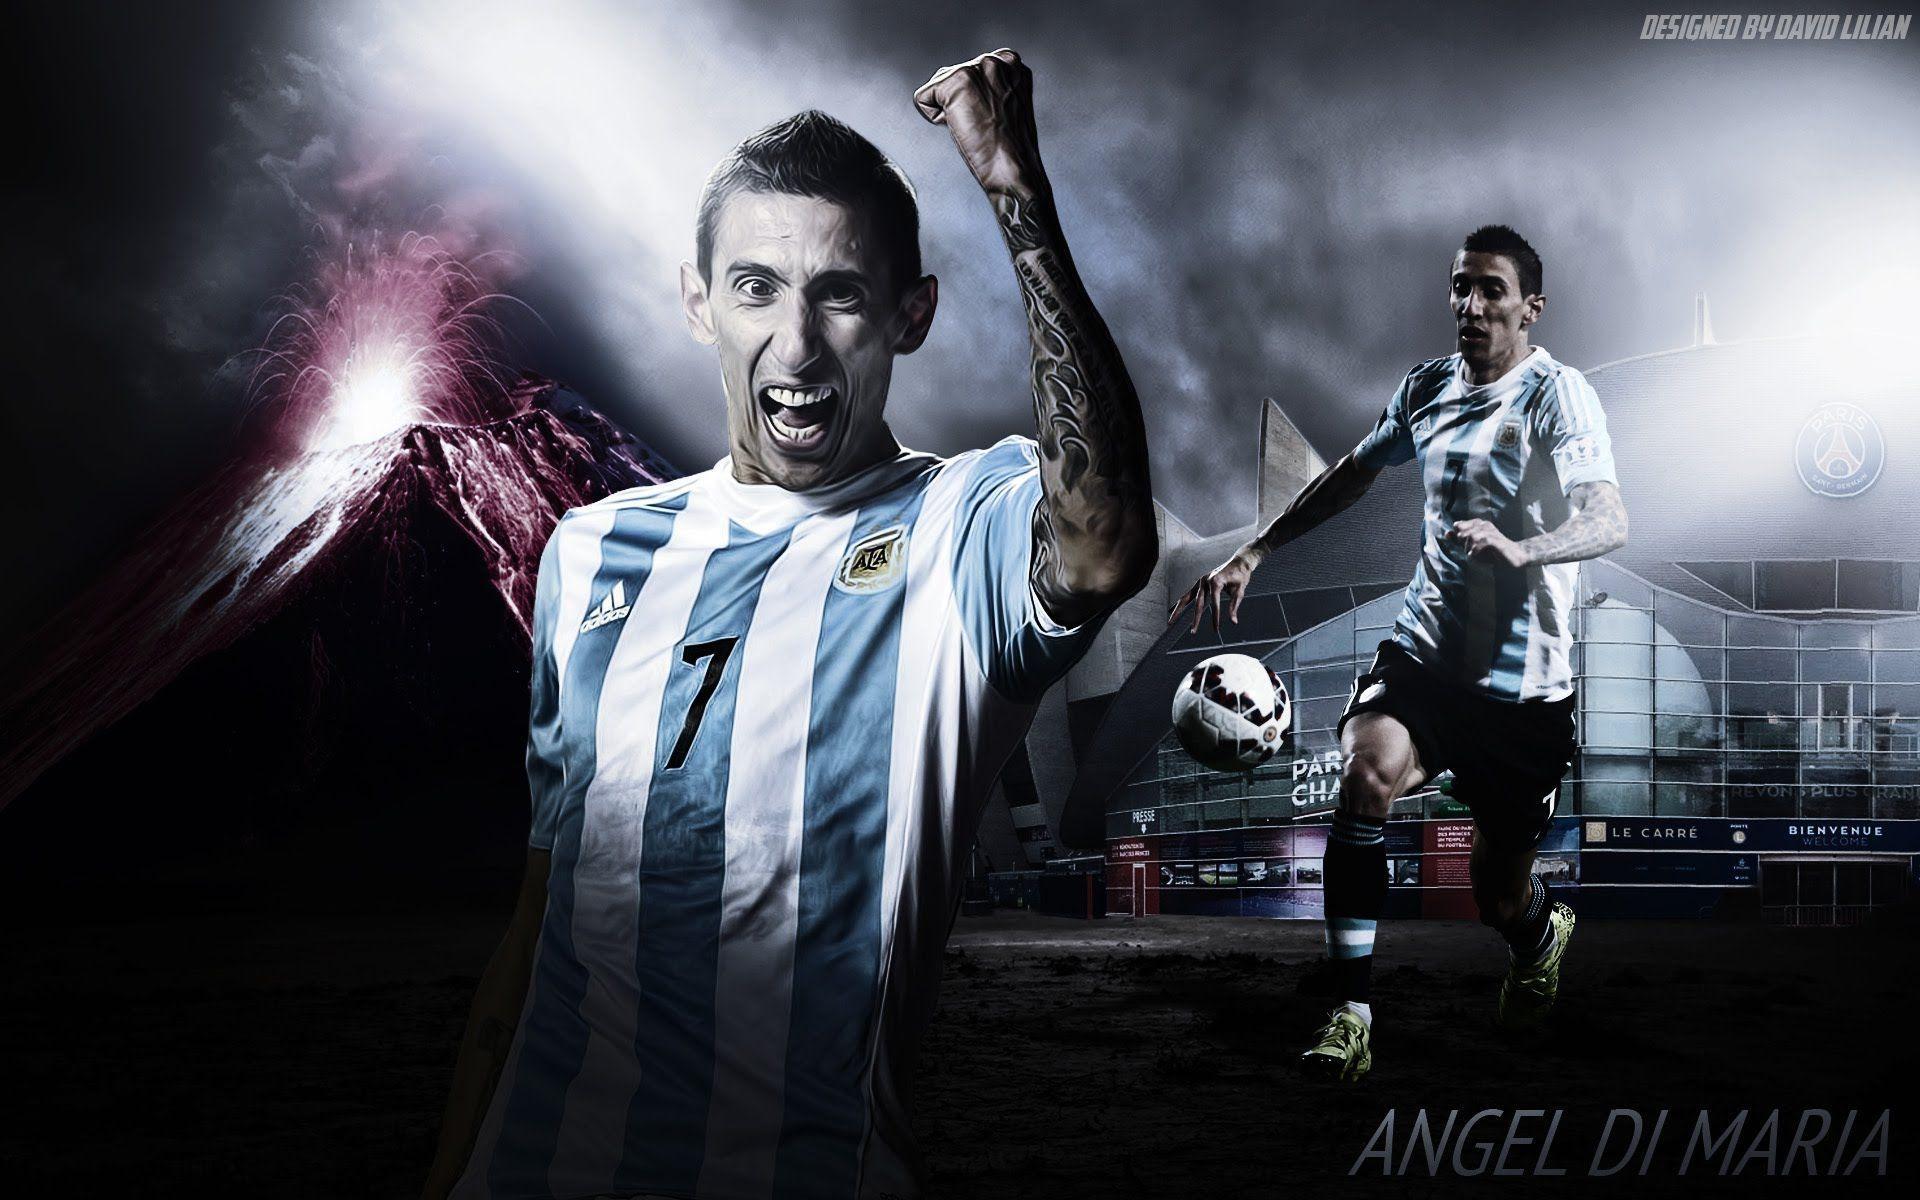 How to Make Sports Wallpaper Designs on Photohop Angel Di Maria